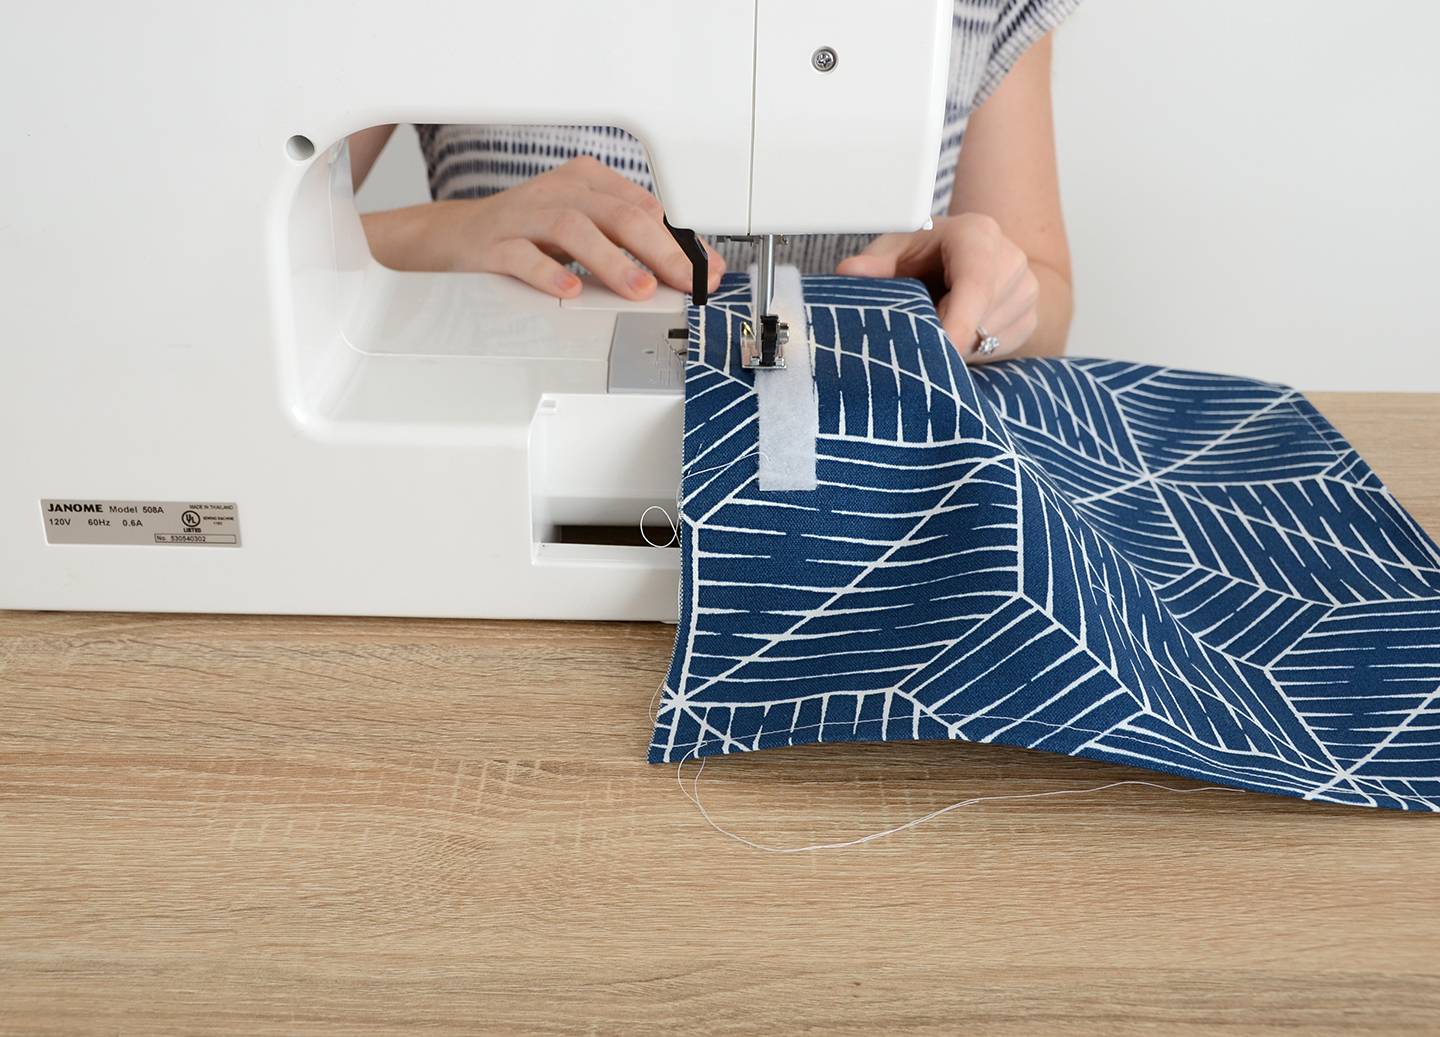 Make This! Crafter's Tool Belt With Detachable Apron | Curbly #diy #sewing 